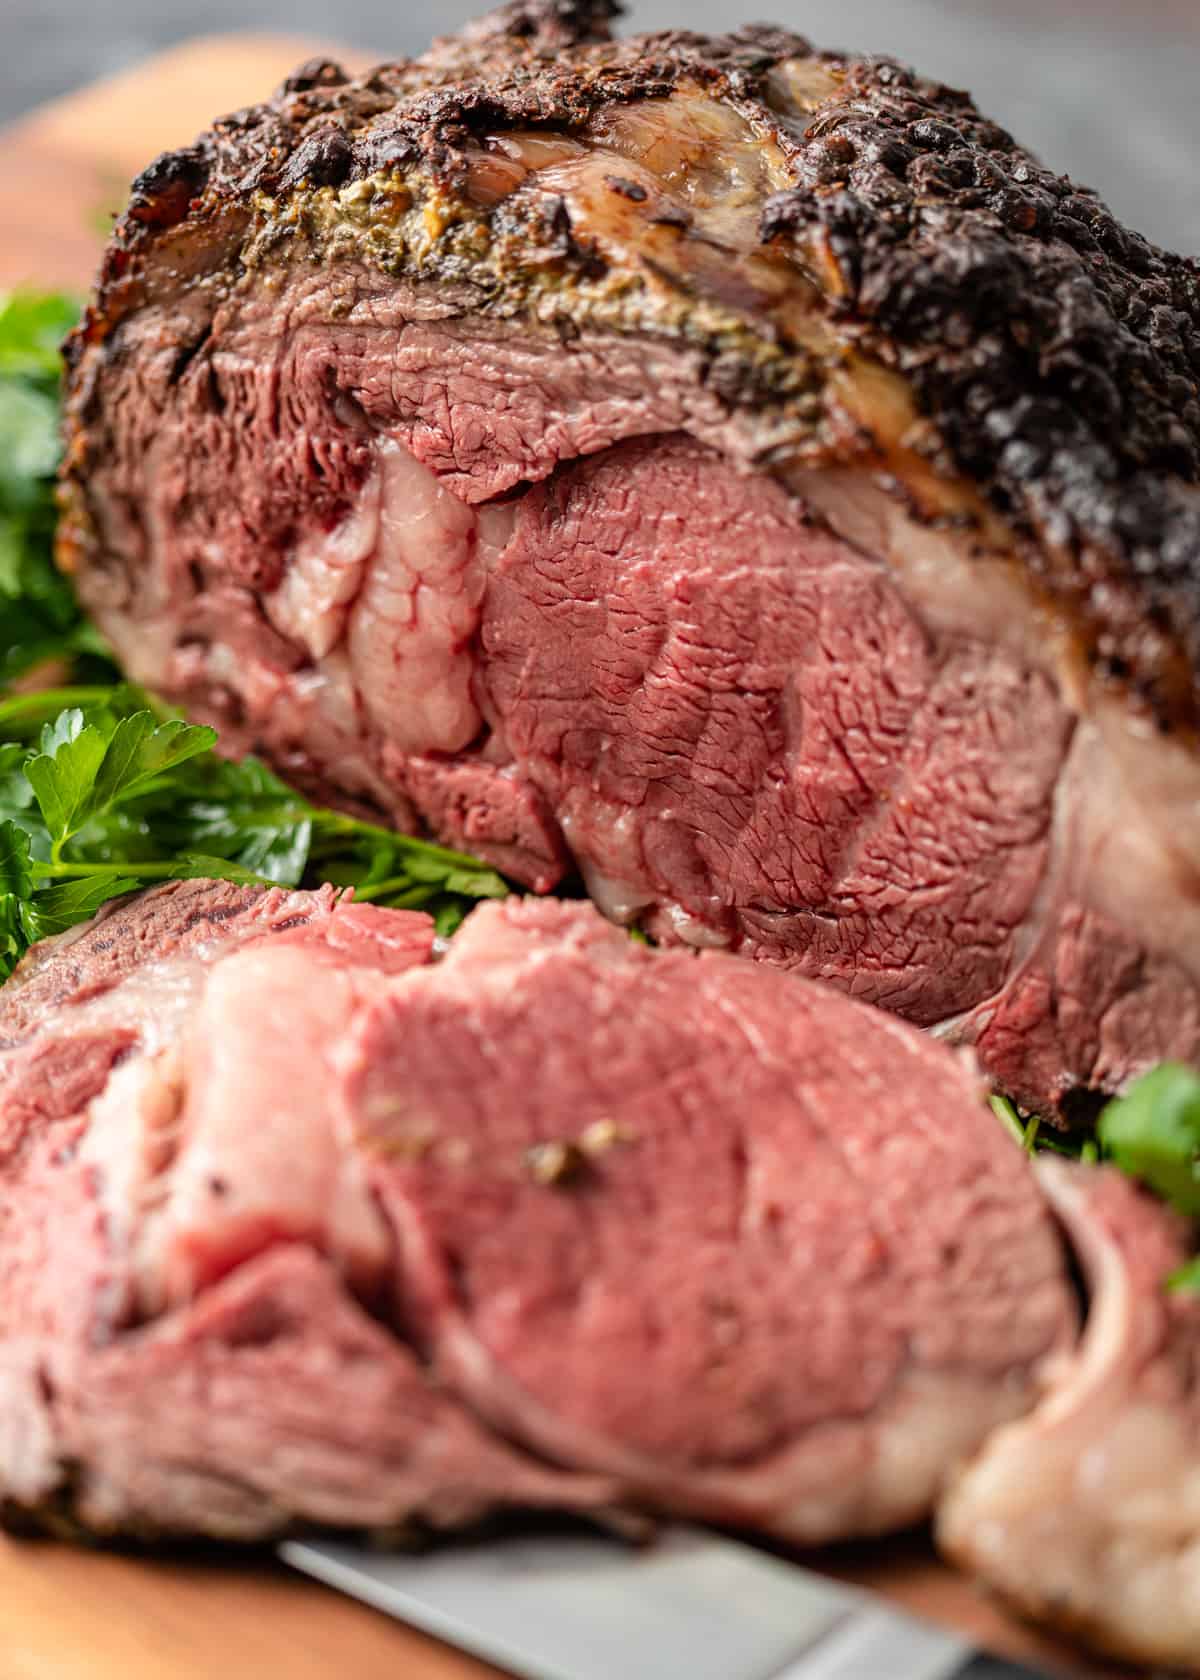 extreme closeup: sliced prime rib with the juicy interior showing